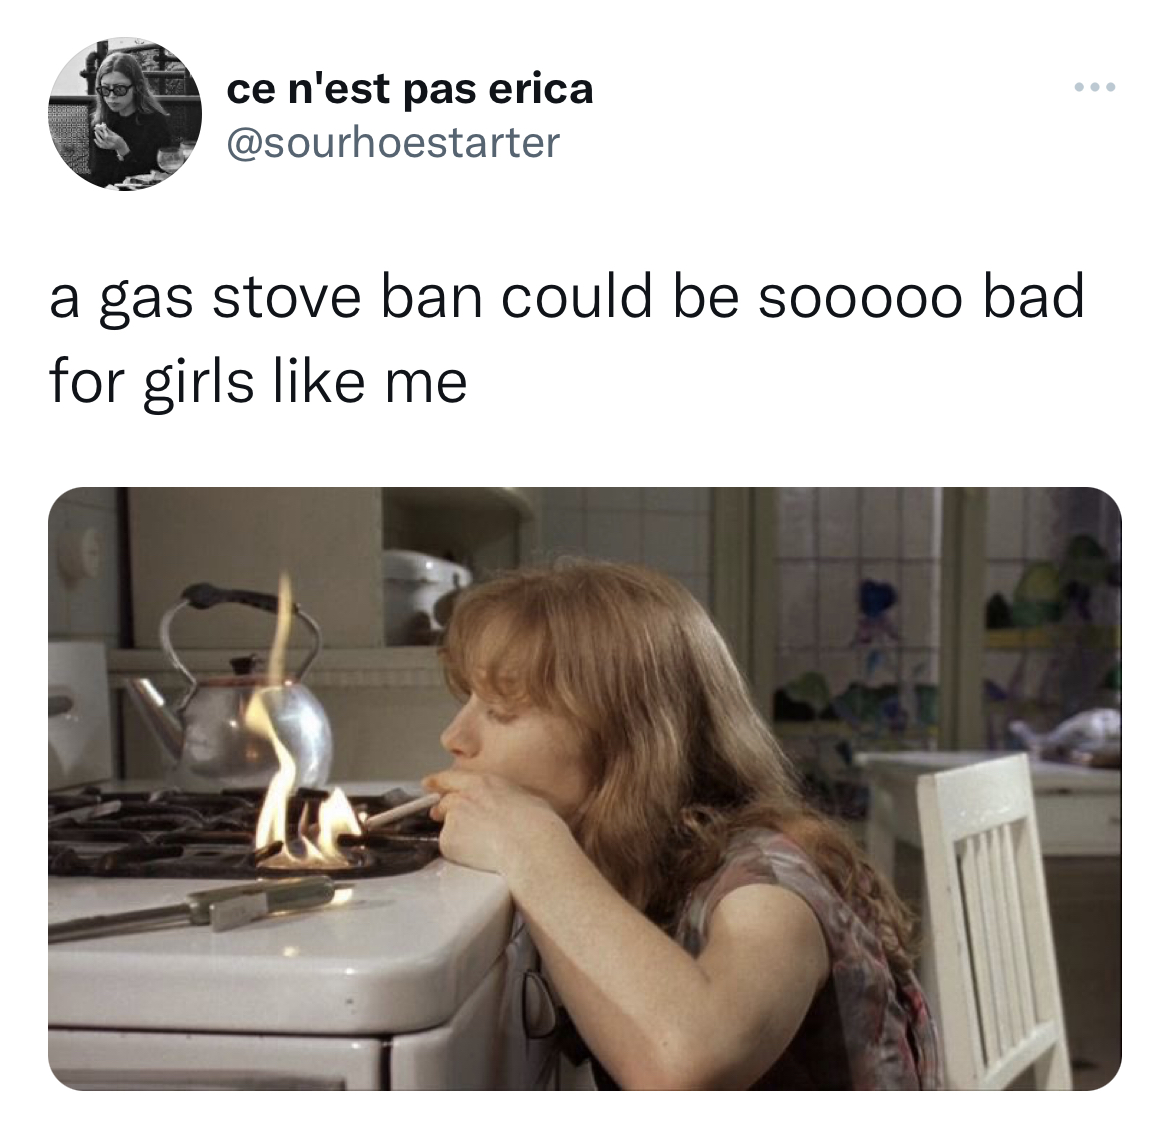 Gas Stove Ban Memes musée national picasso-paris - ce n'est pas erica www a gas stove ban could be sooooo bad for girls me